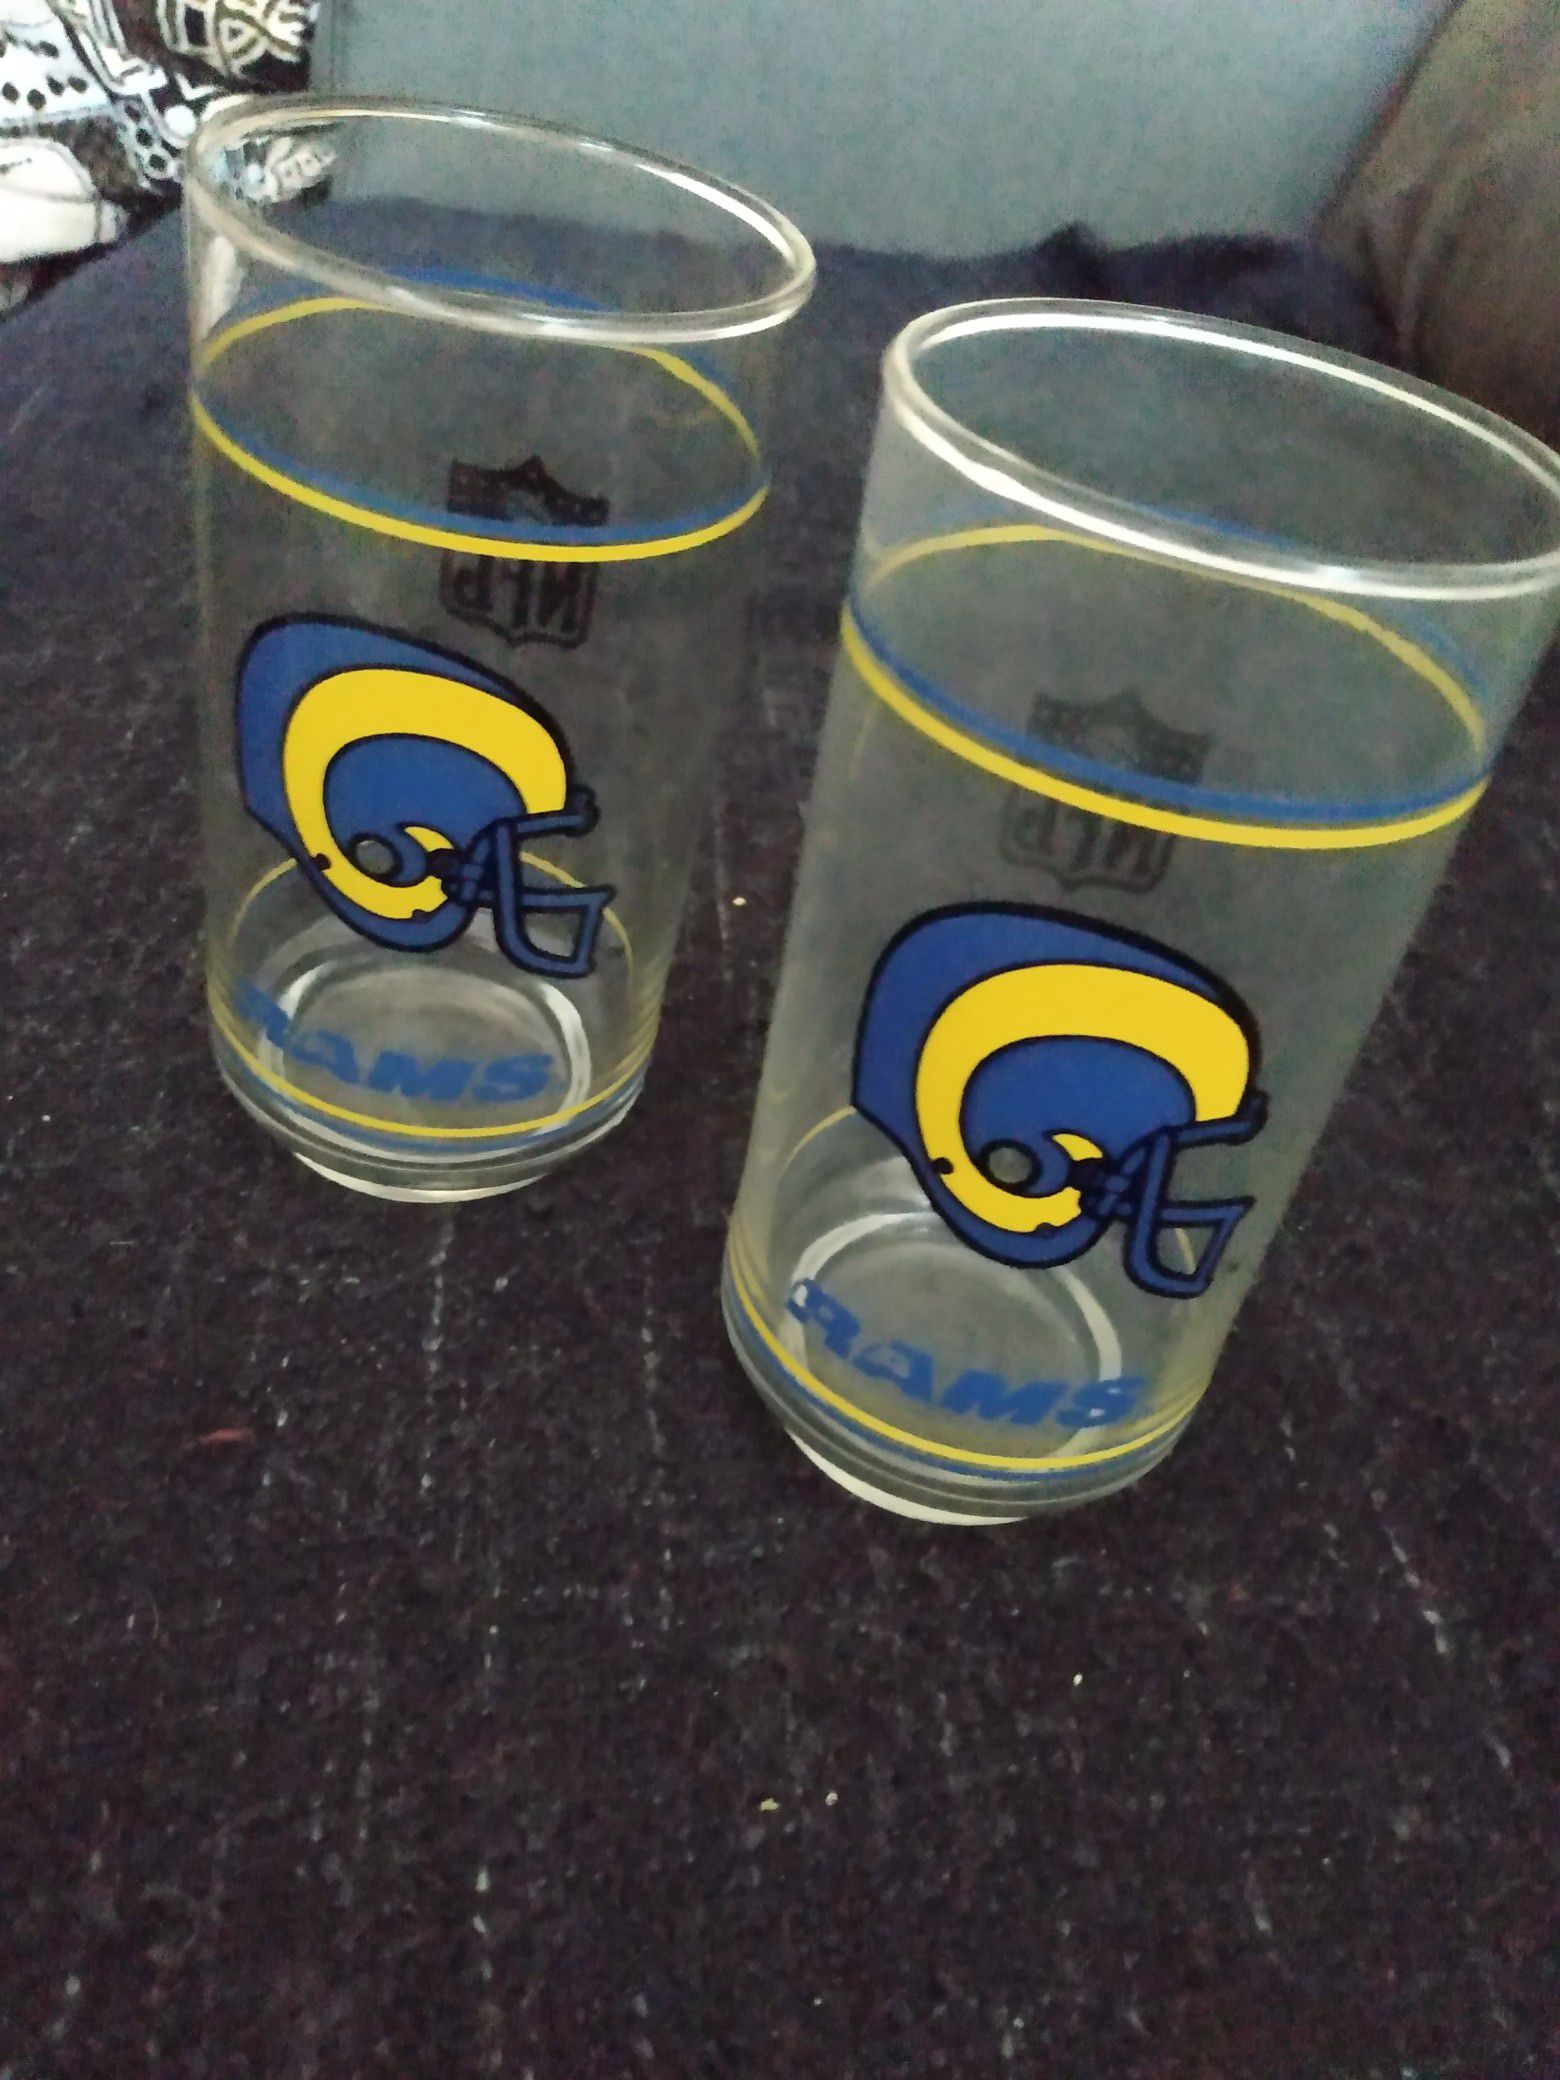 Collectable Vintage L.A.Rams glasses from mobile gas station 1980s, excellent condition